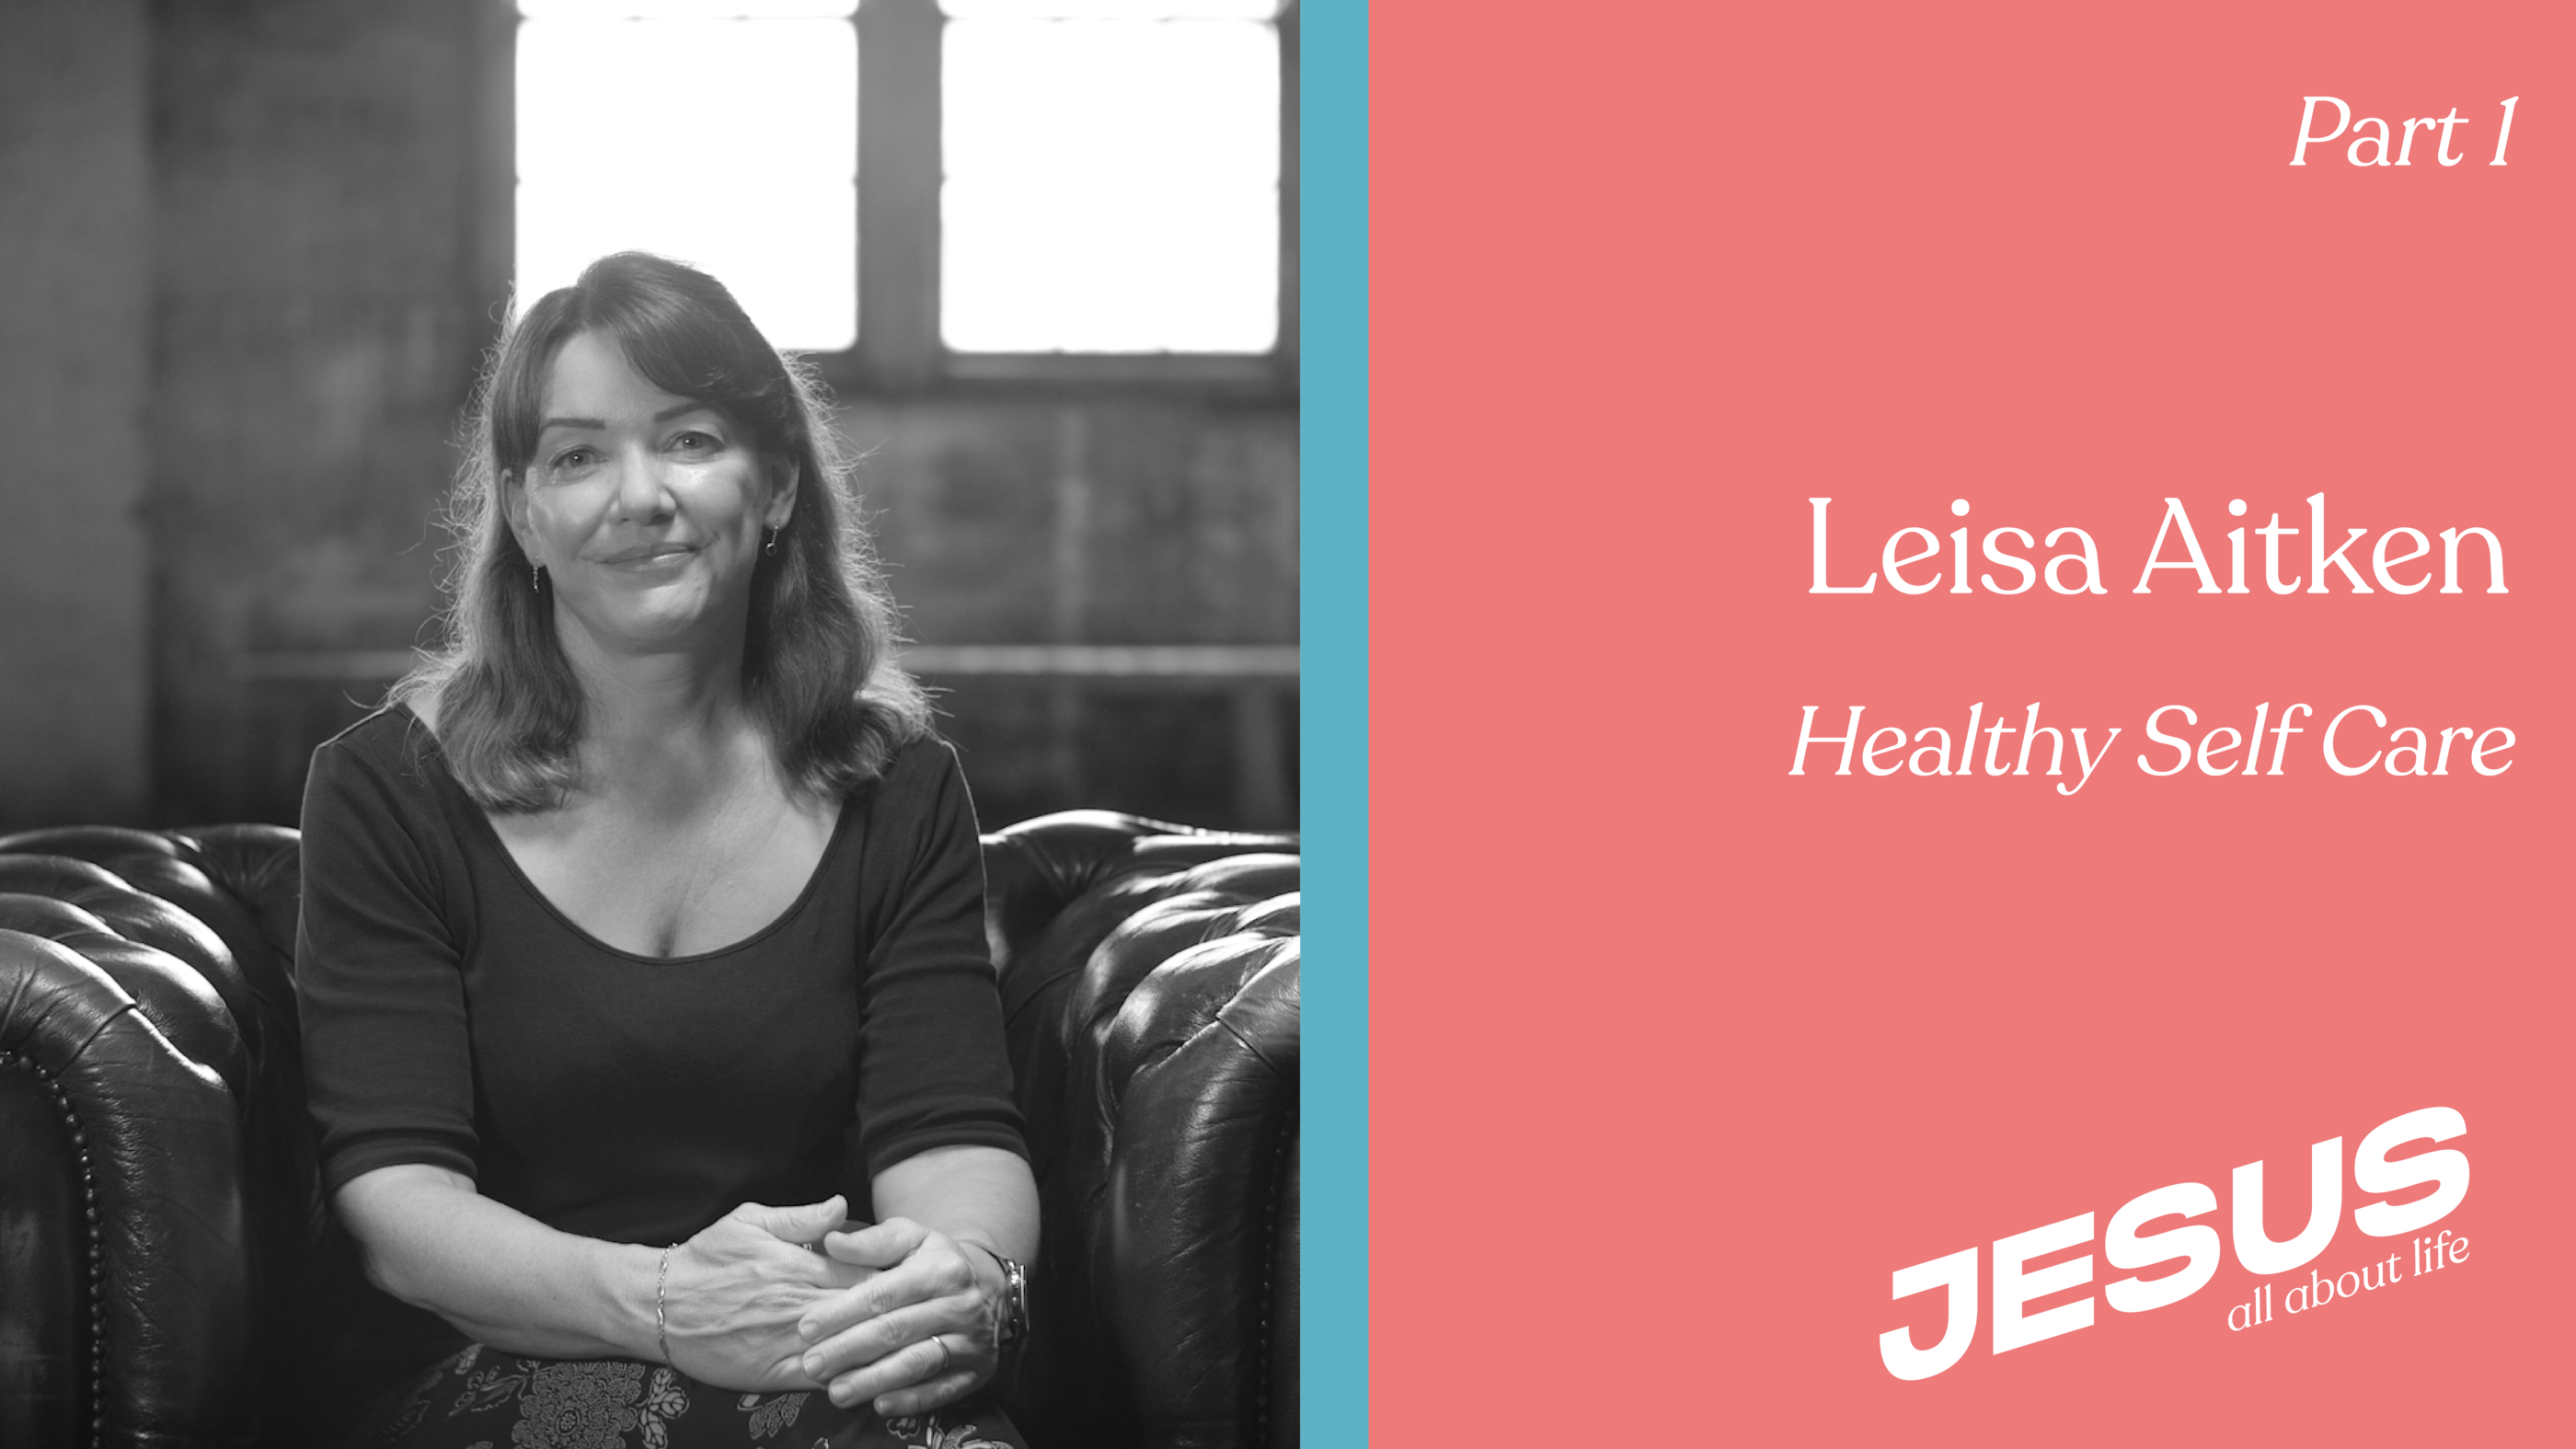 HEALTHY SELF CARE WITH LEISA AITKEN